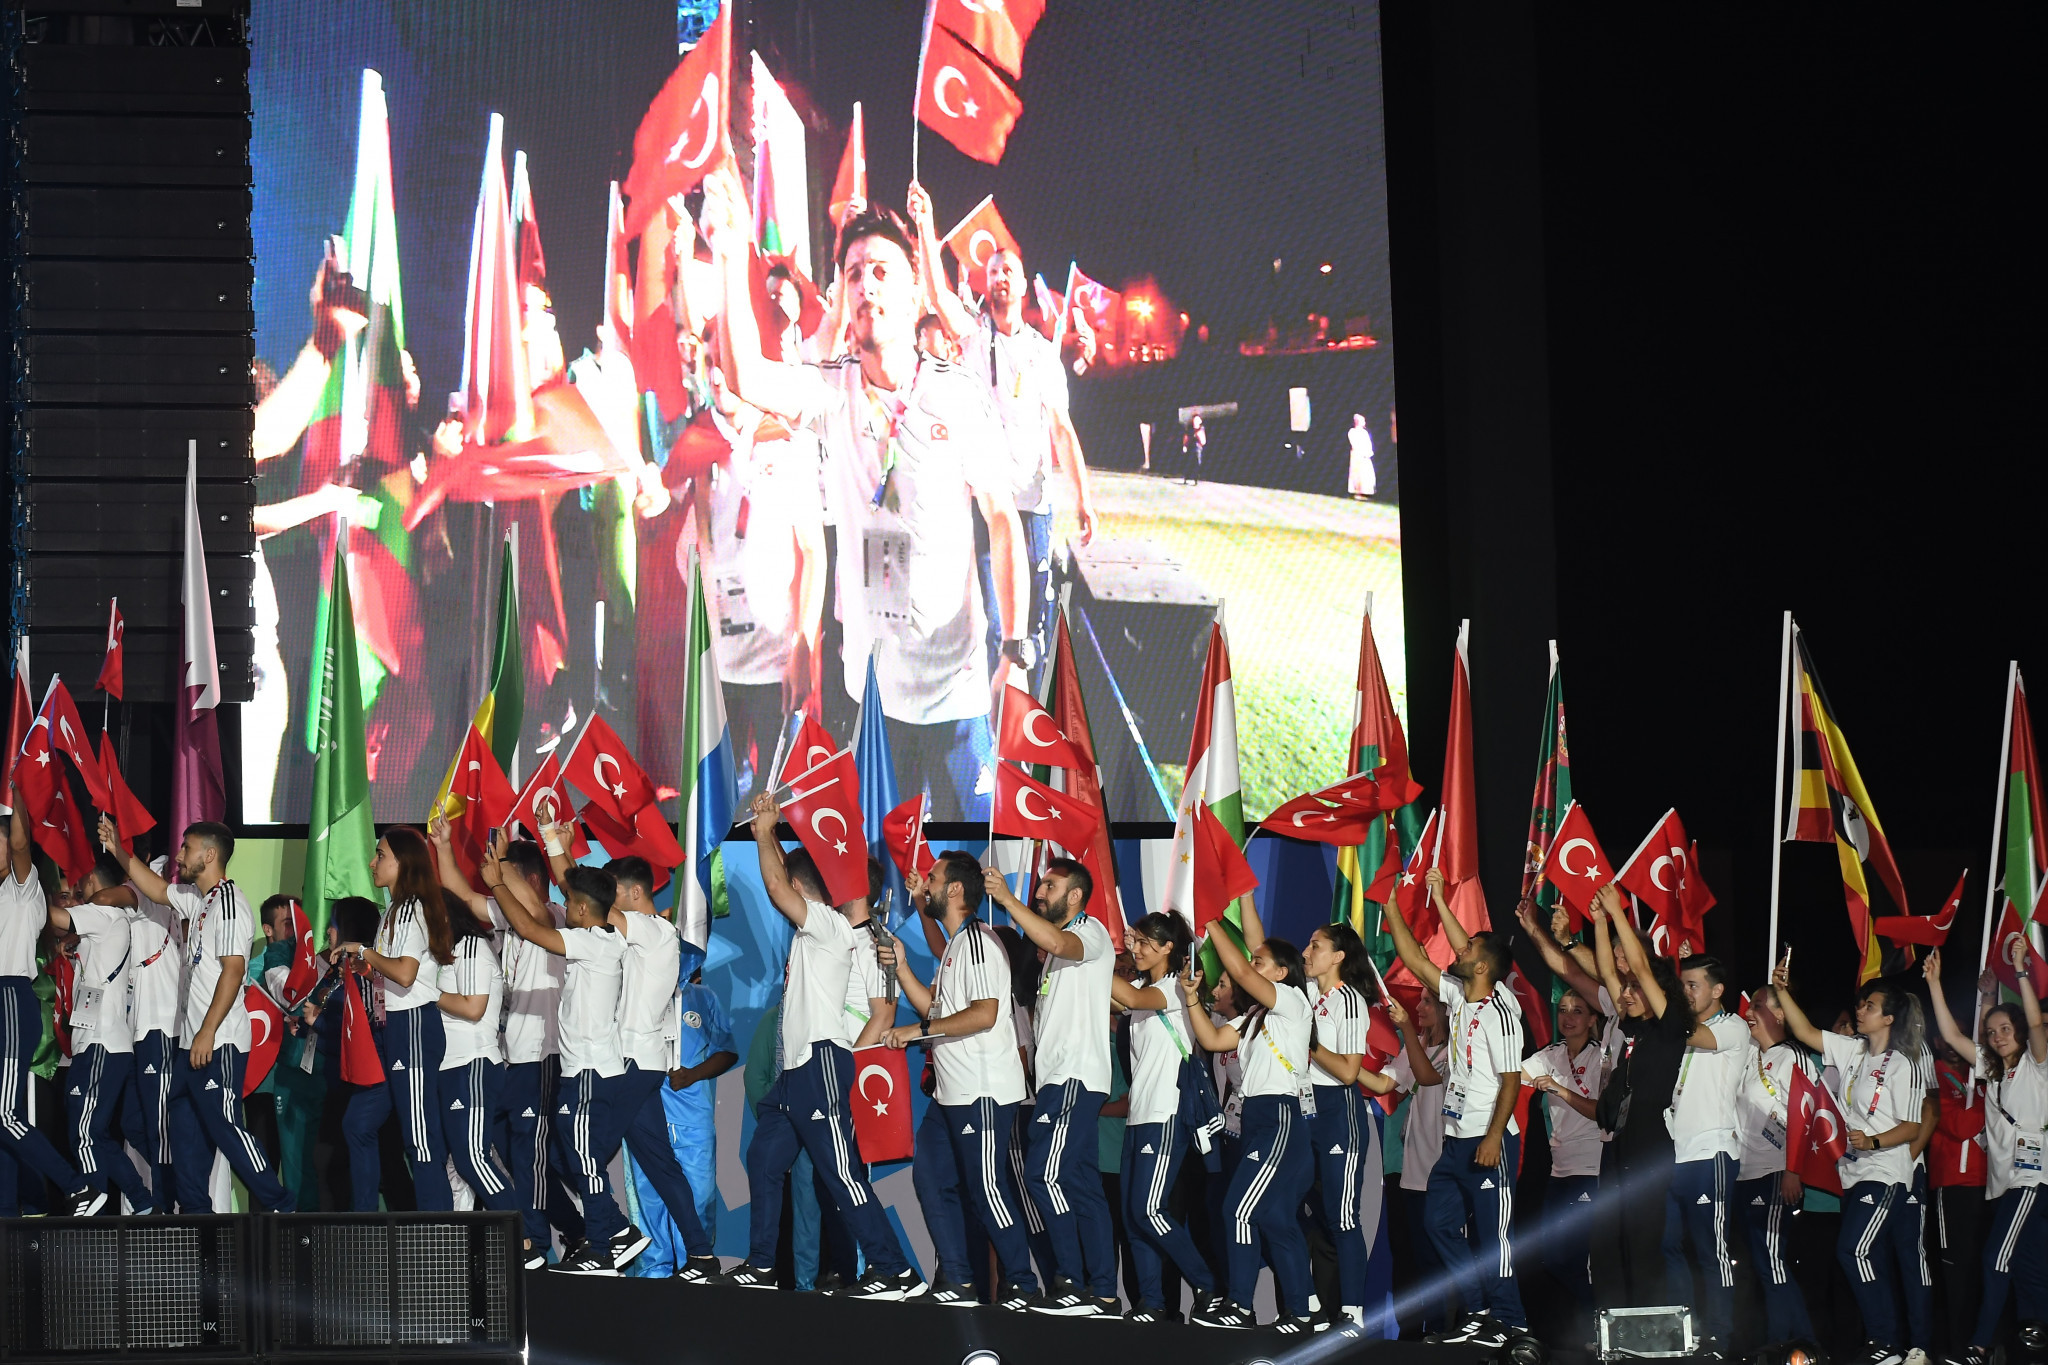 Turkey's athletes were celebrated after winning more than 300 medals ©Konya 2021